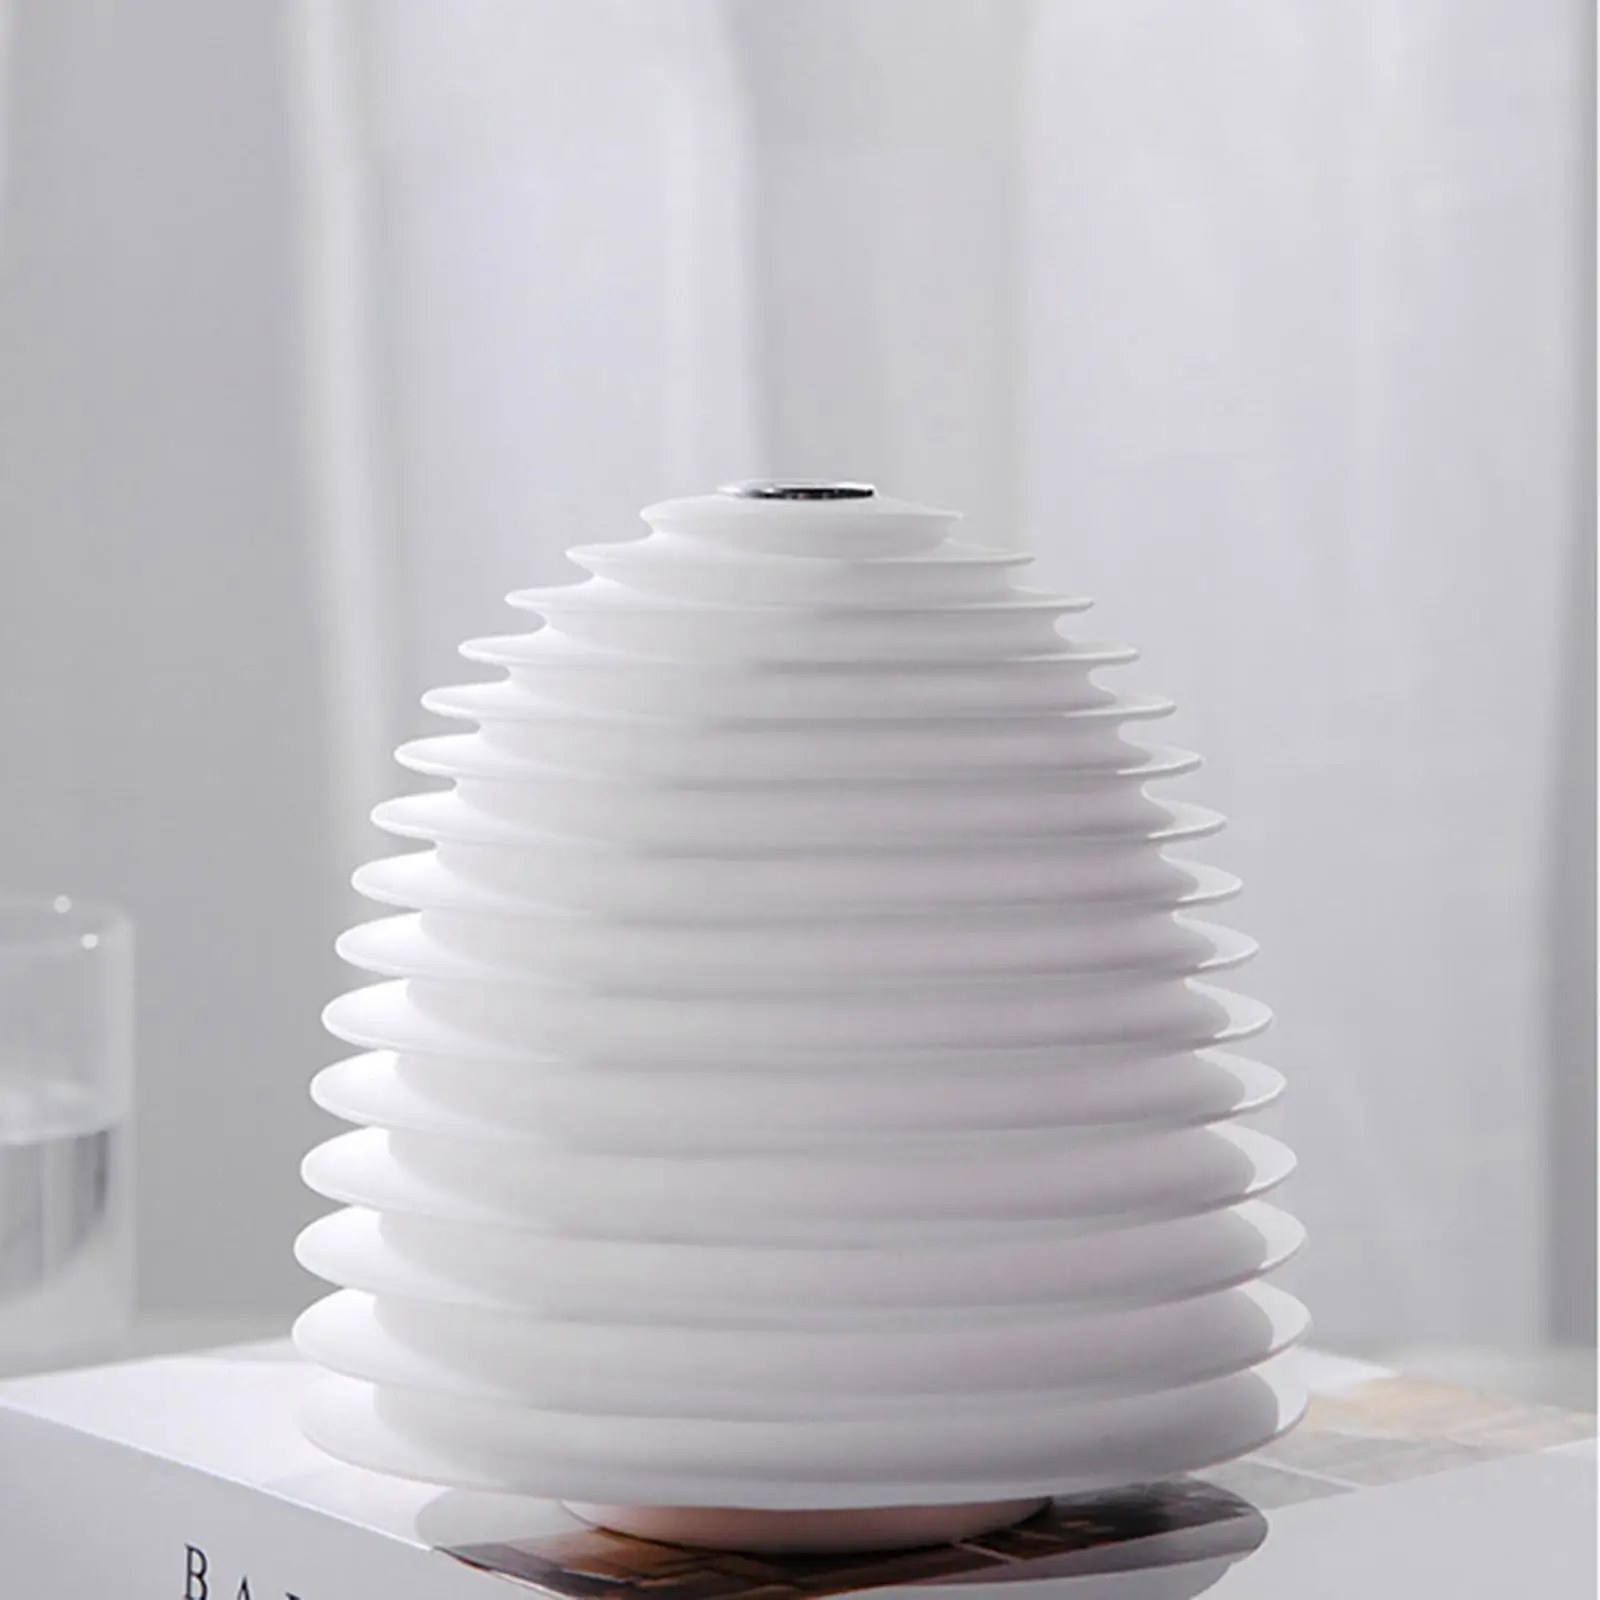 USB Humidifier Low Noise  Au Shut Off Diffuser LED Humidifier Portable Humidifier for Hotel NightStand Home Nursery Yoga